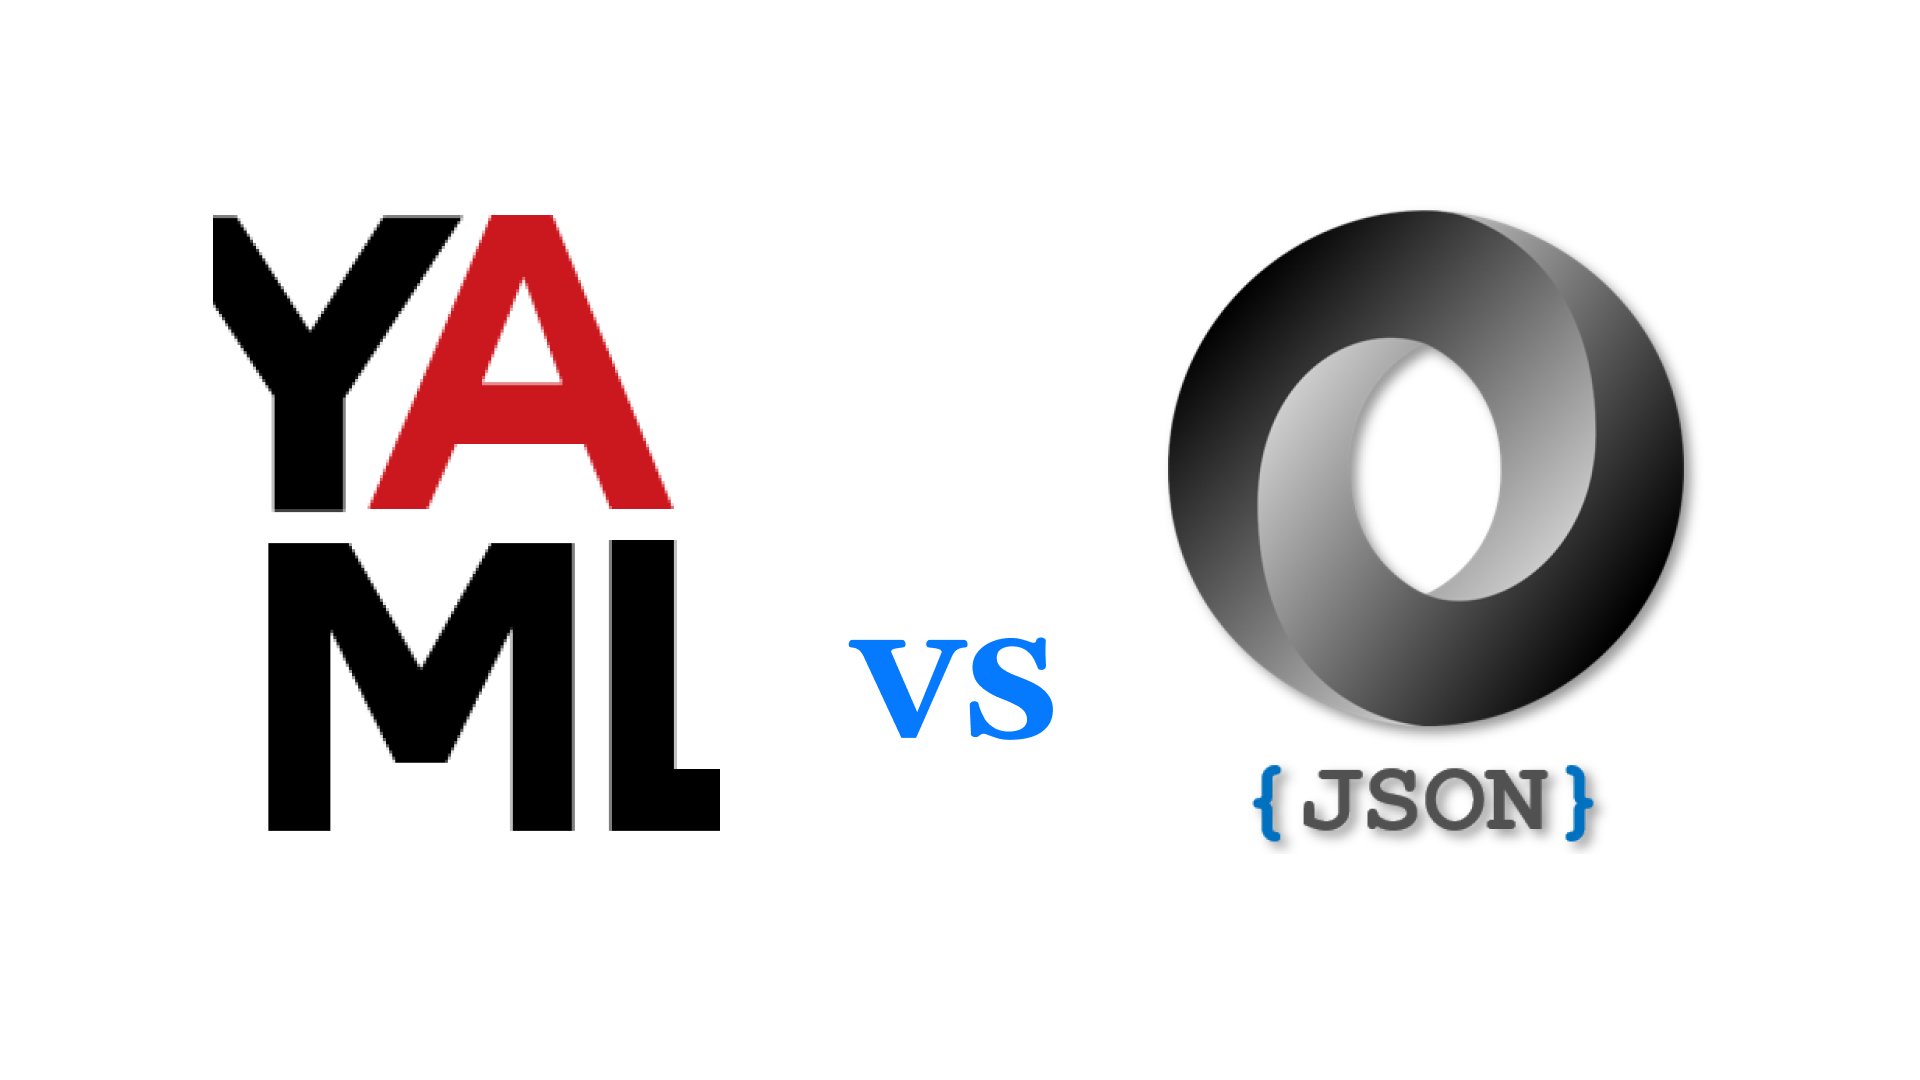 YAML vs. JSON: What is the difference?